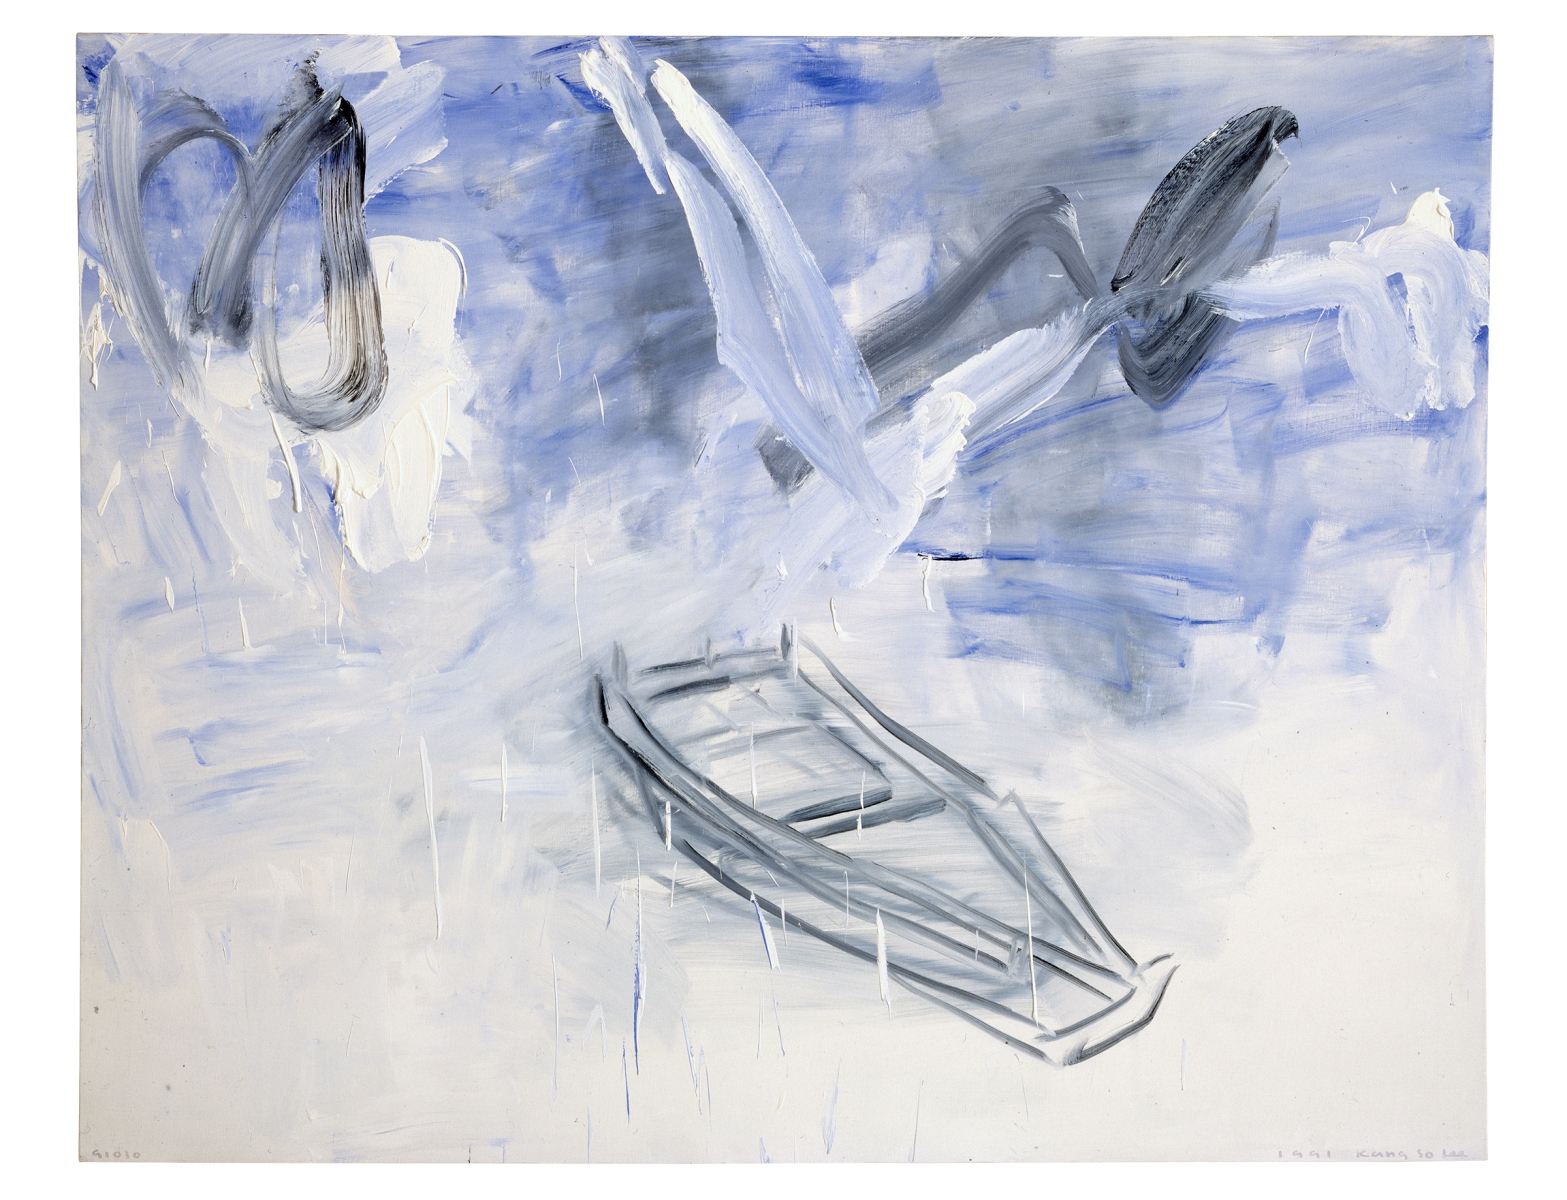 Untitled-91030, 1991, Oil on Canvas, 130x162cm